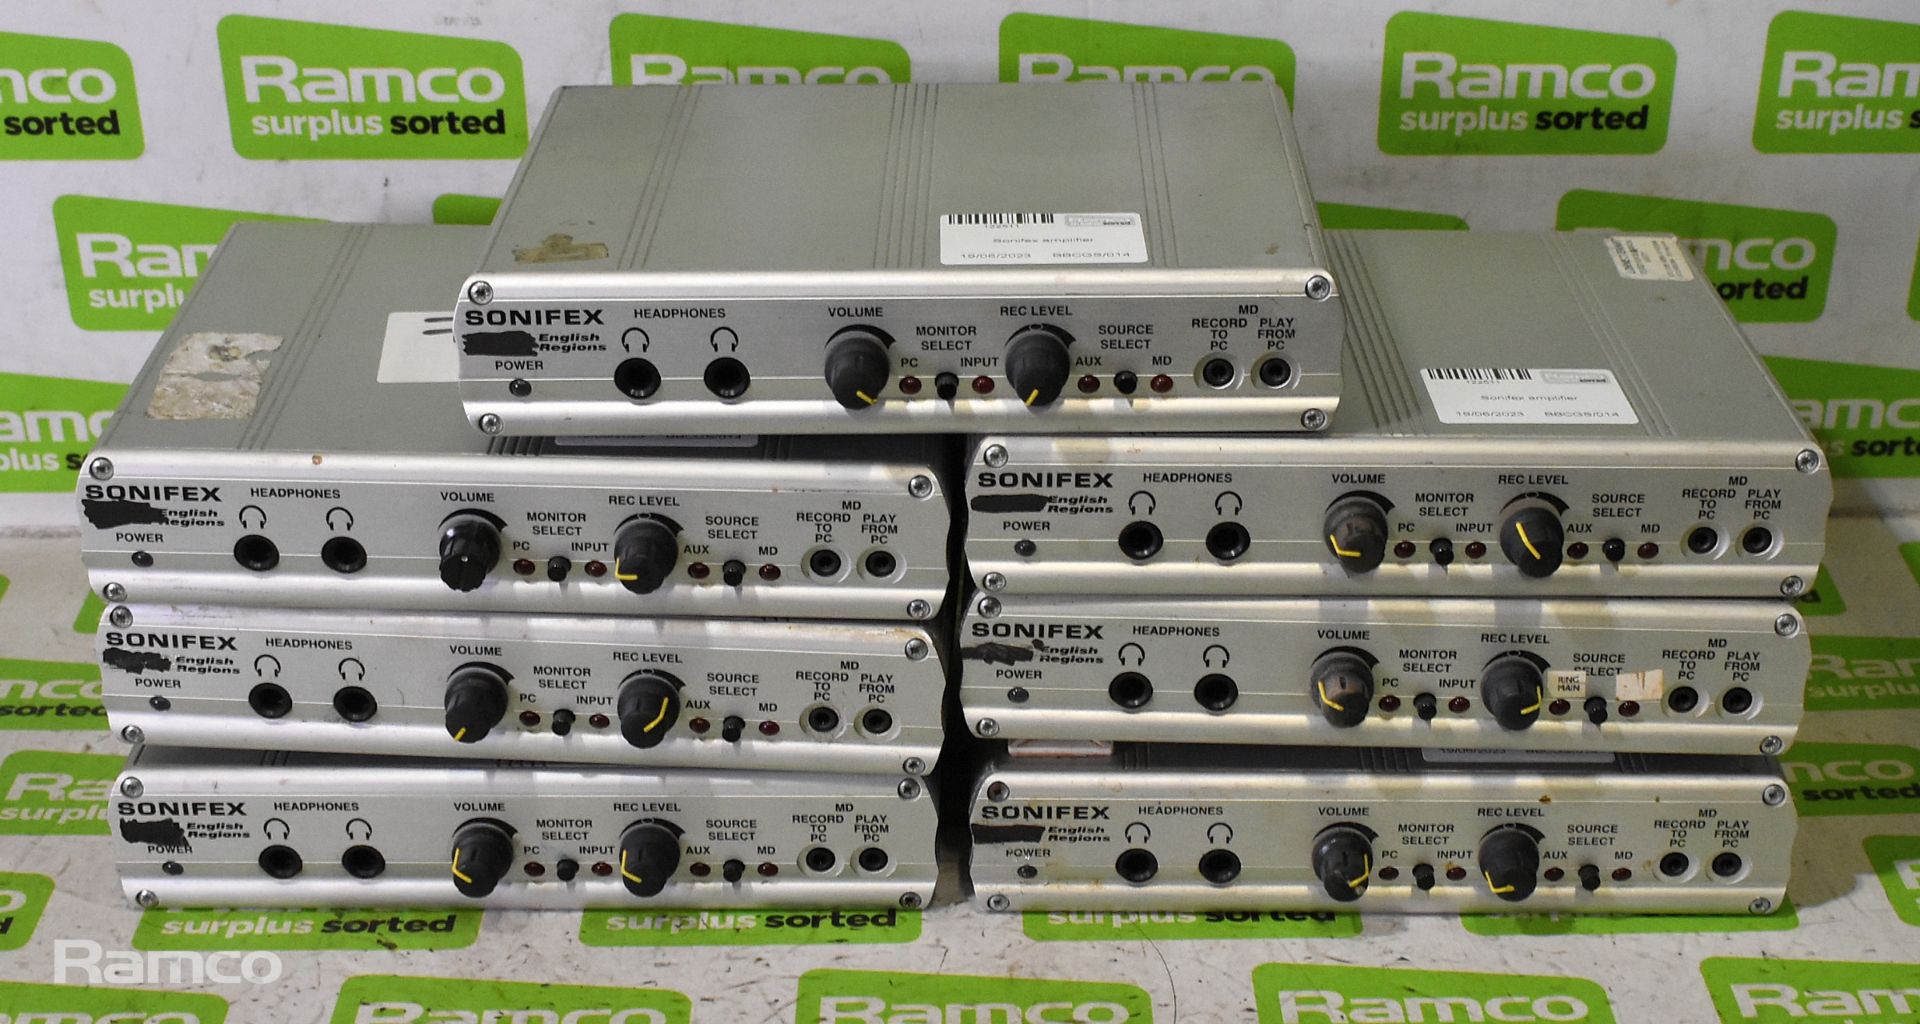 7x Sonifex control amplifiers